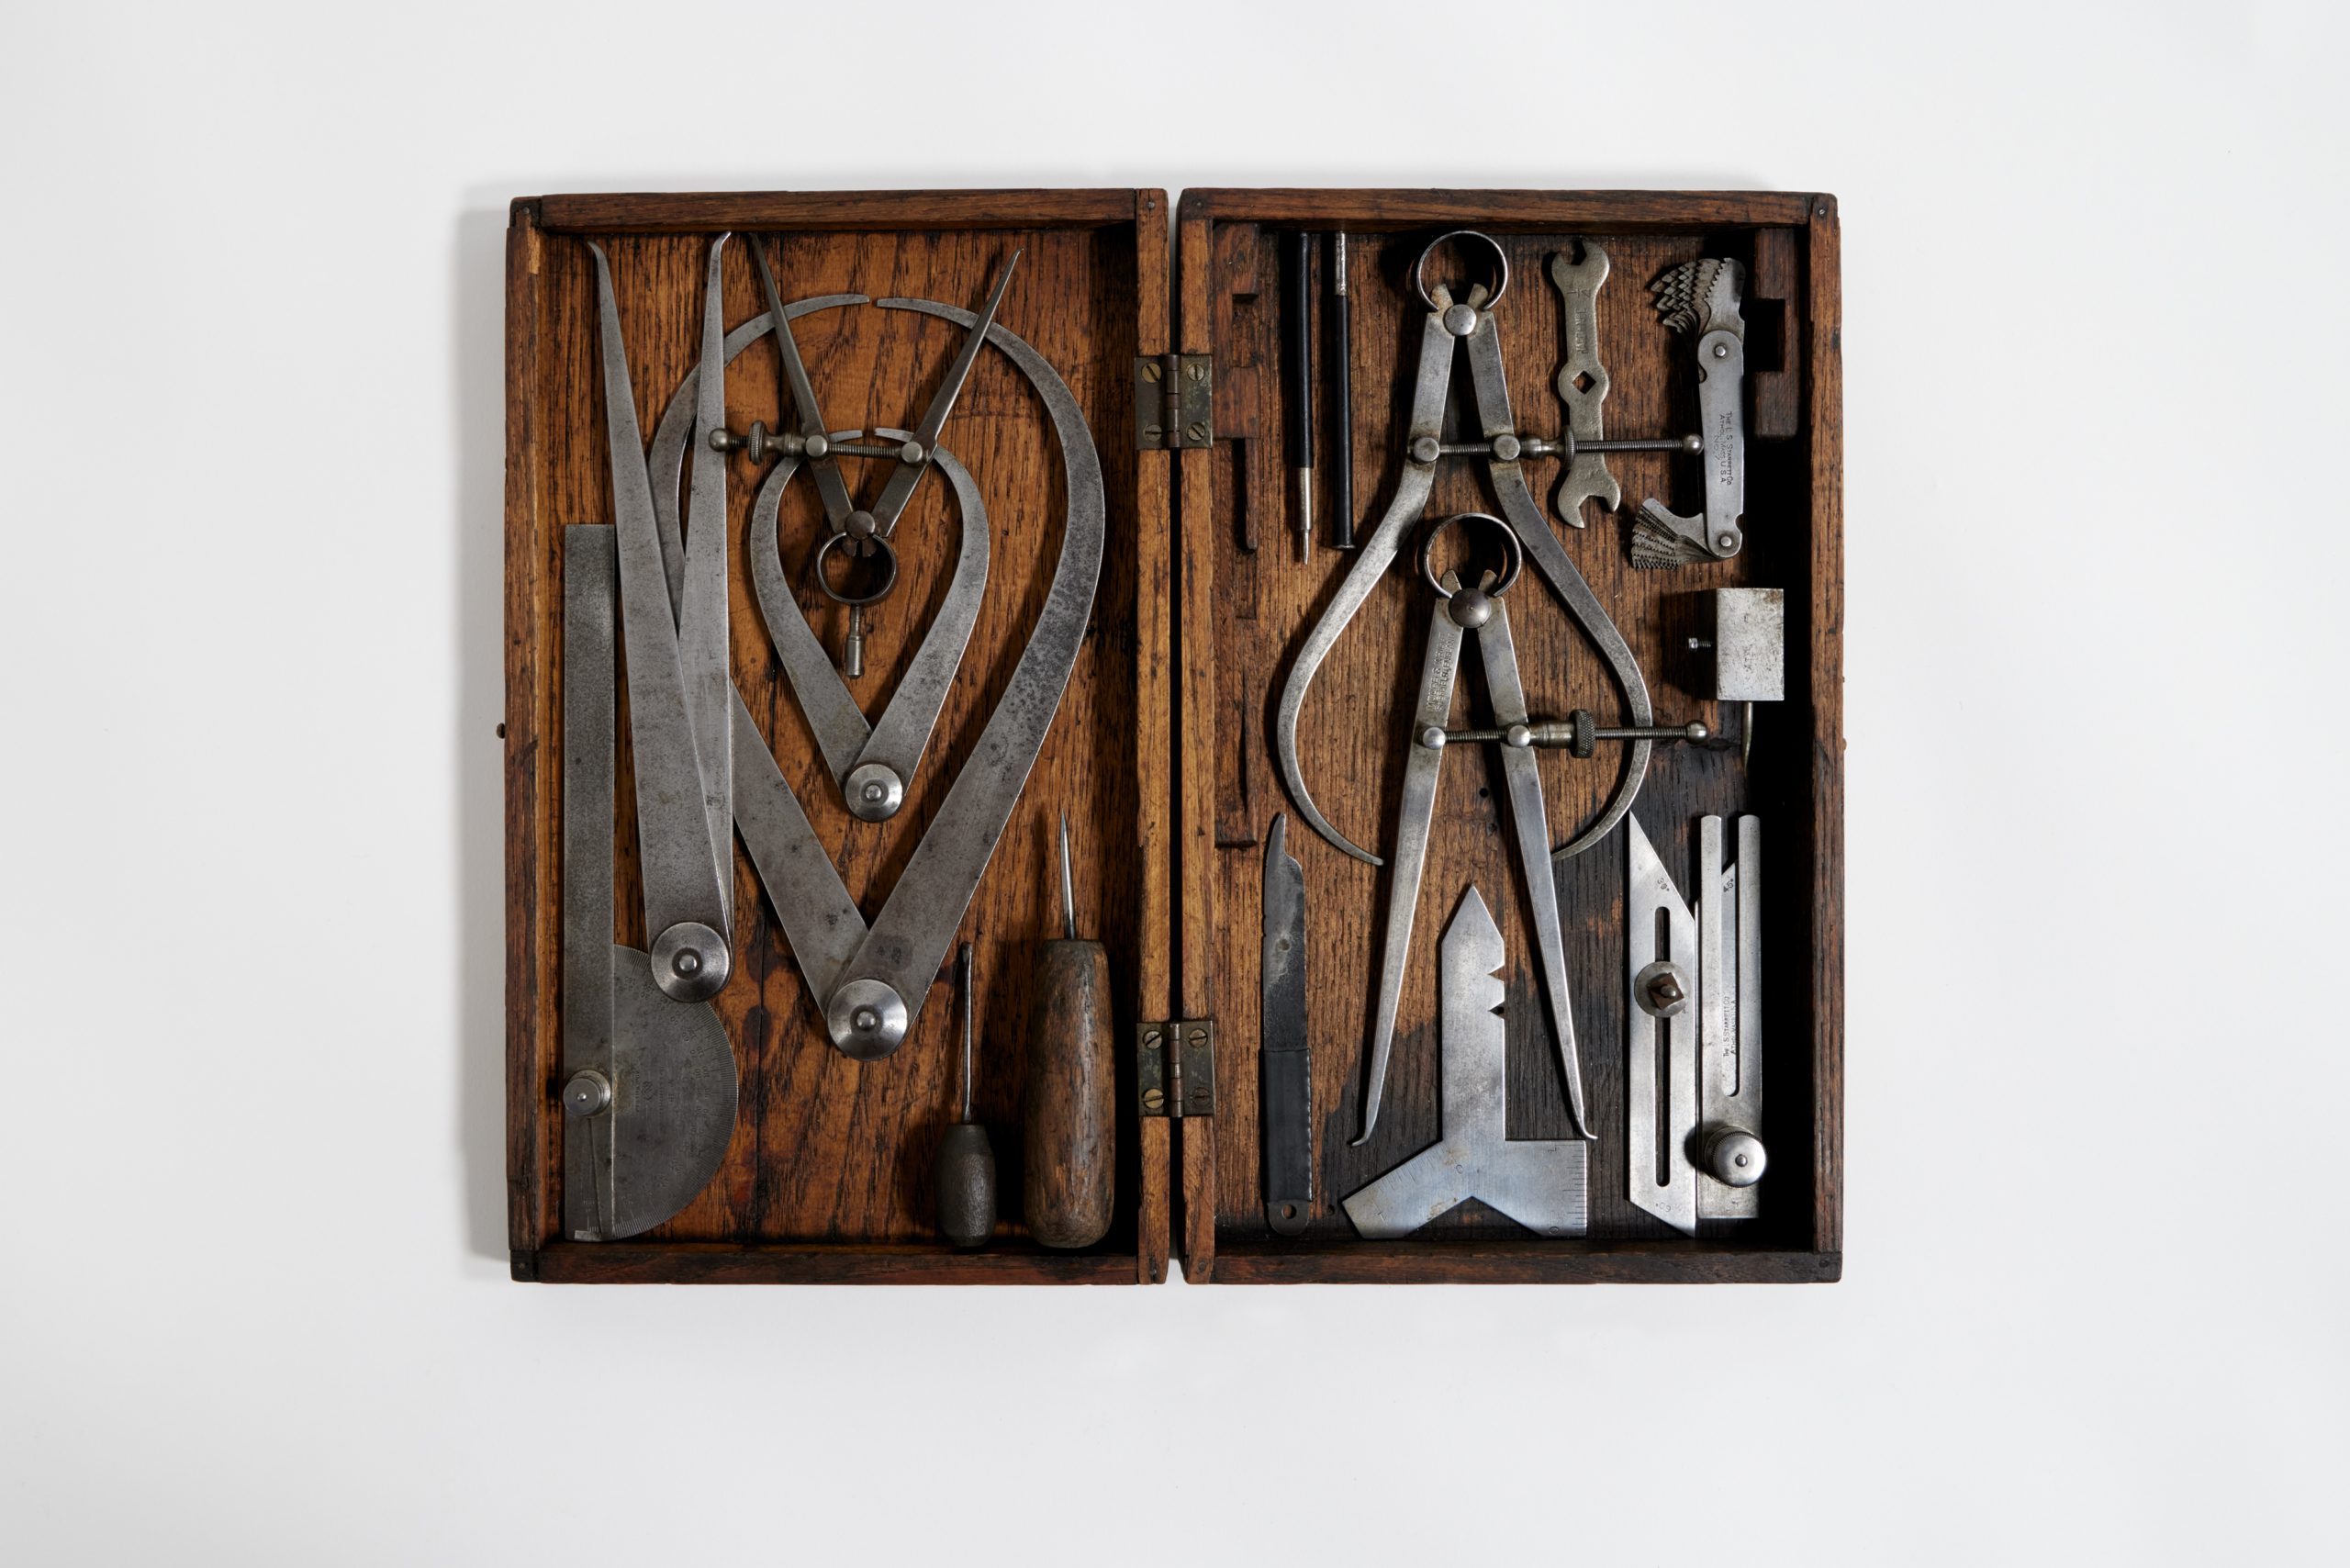 flat wooden case full of metal tools like box cutters, pincers, pens, screwdrivers